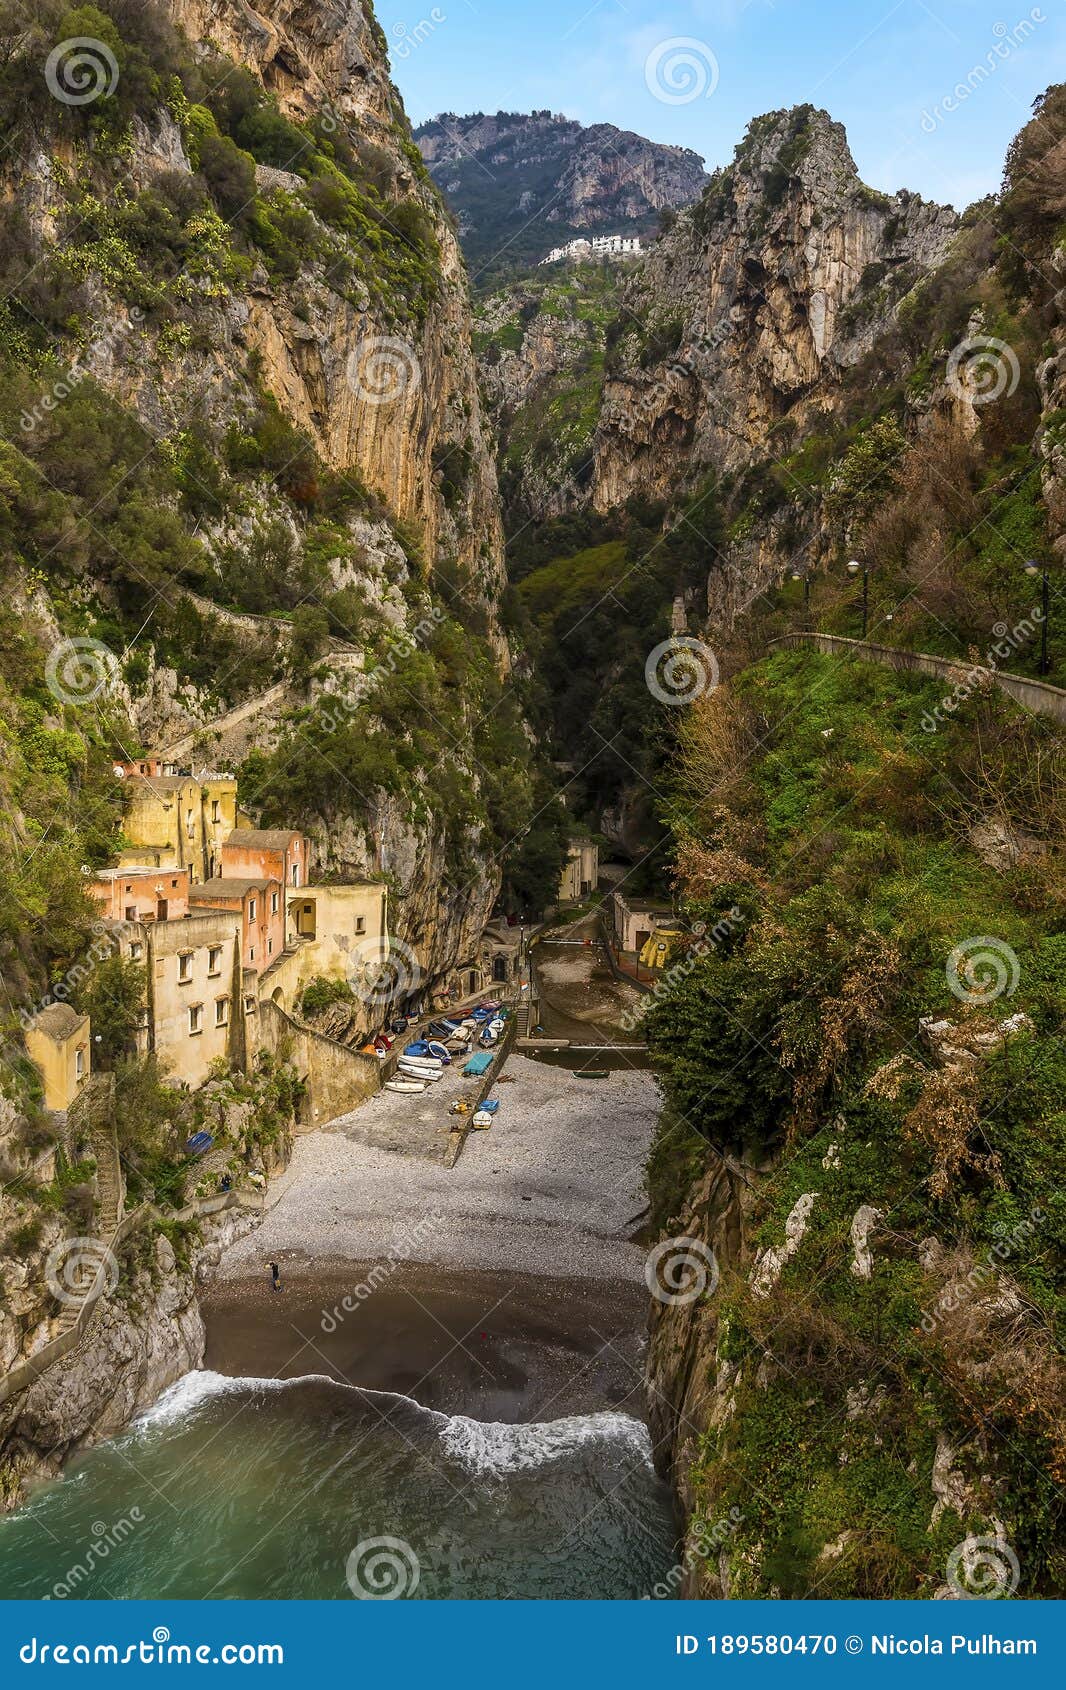 looking down on the fjord and ravine at fiordo di furore on the amalfi coast, italy